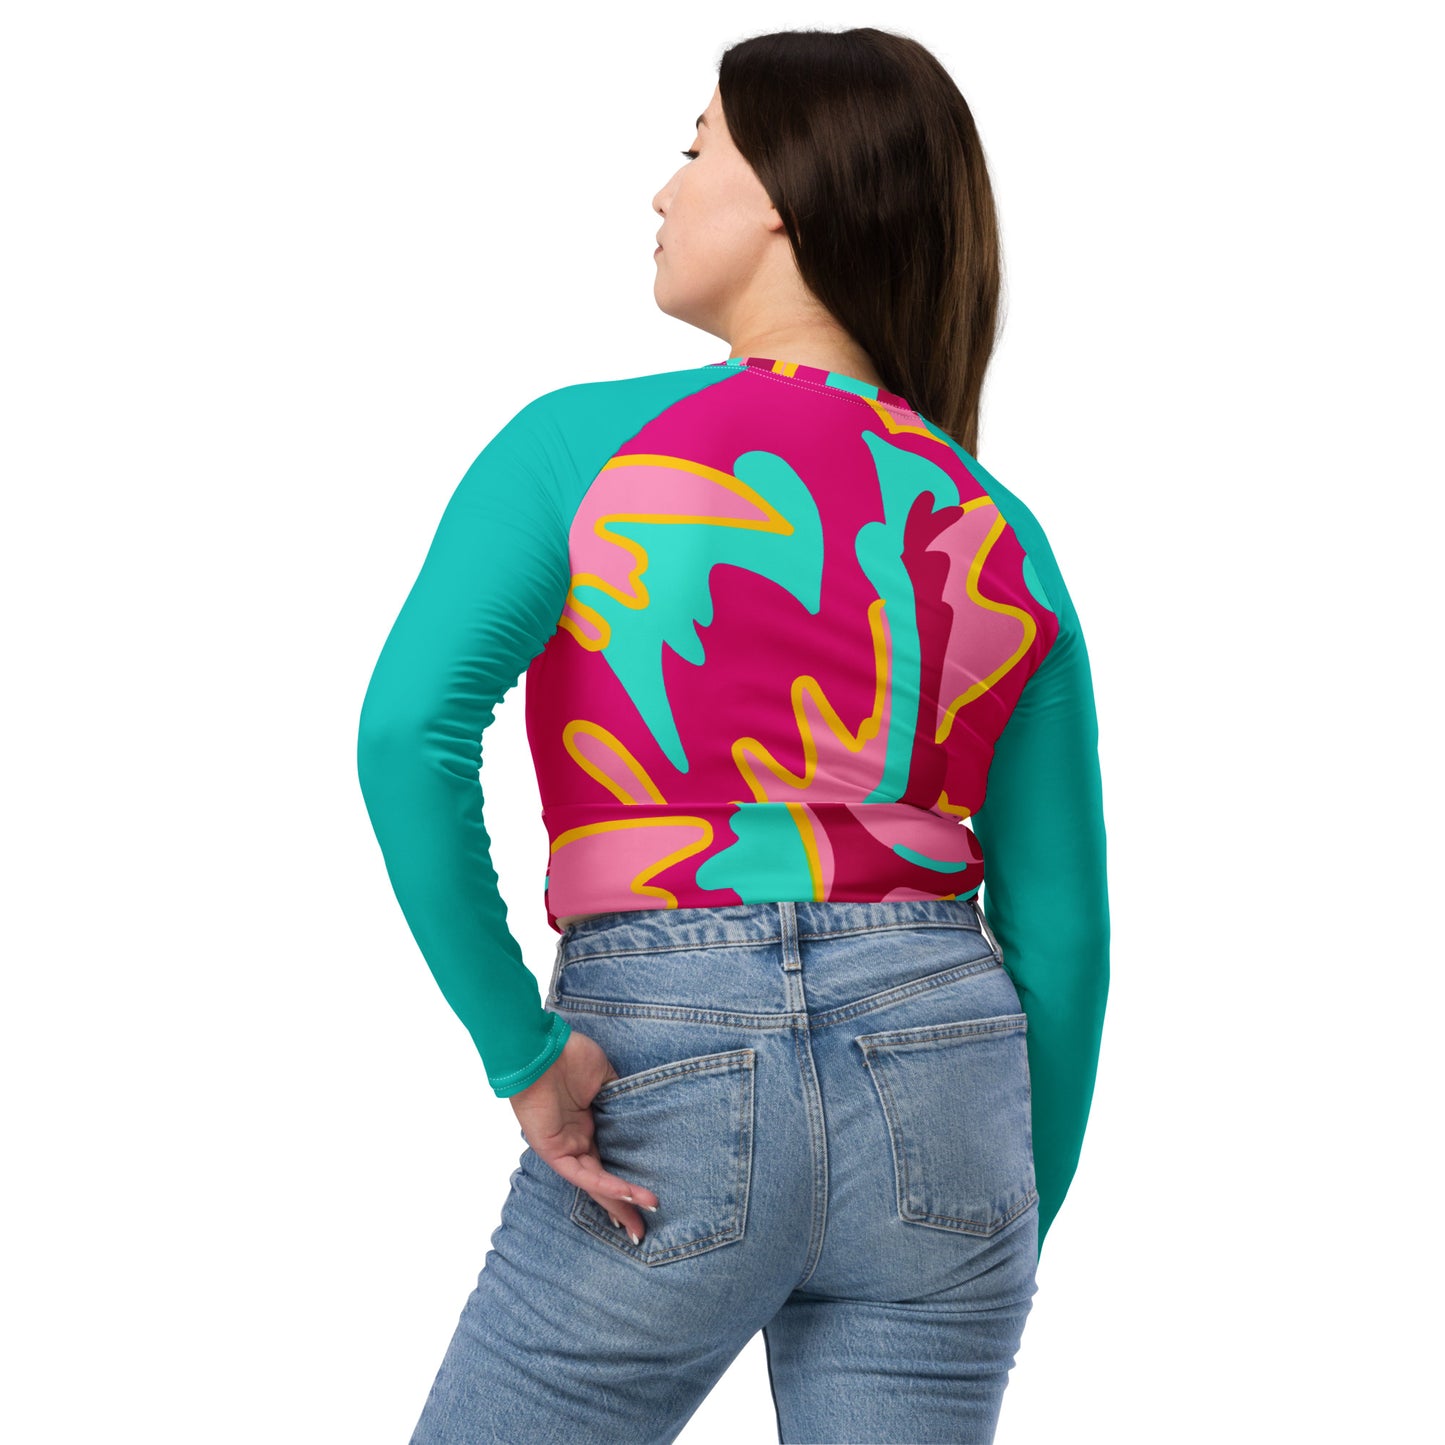 Embrace Body Love, Long-sleeve Crop Top- Full pattern (recycled)